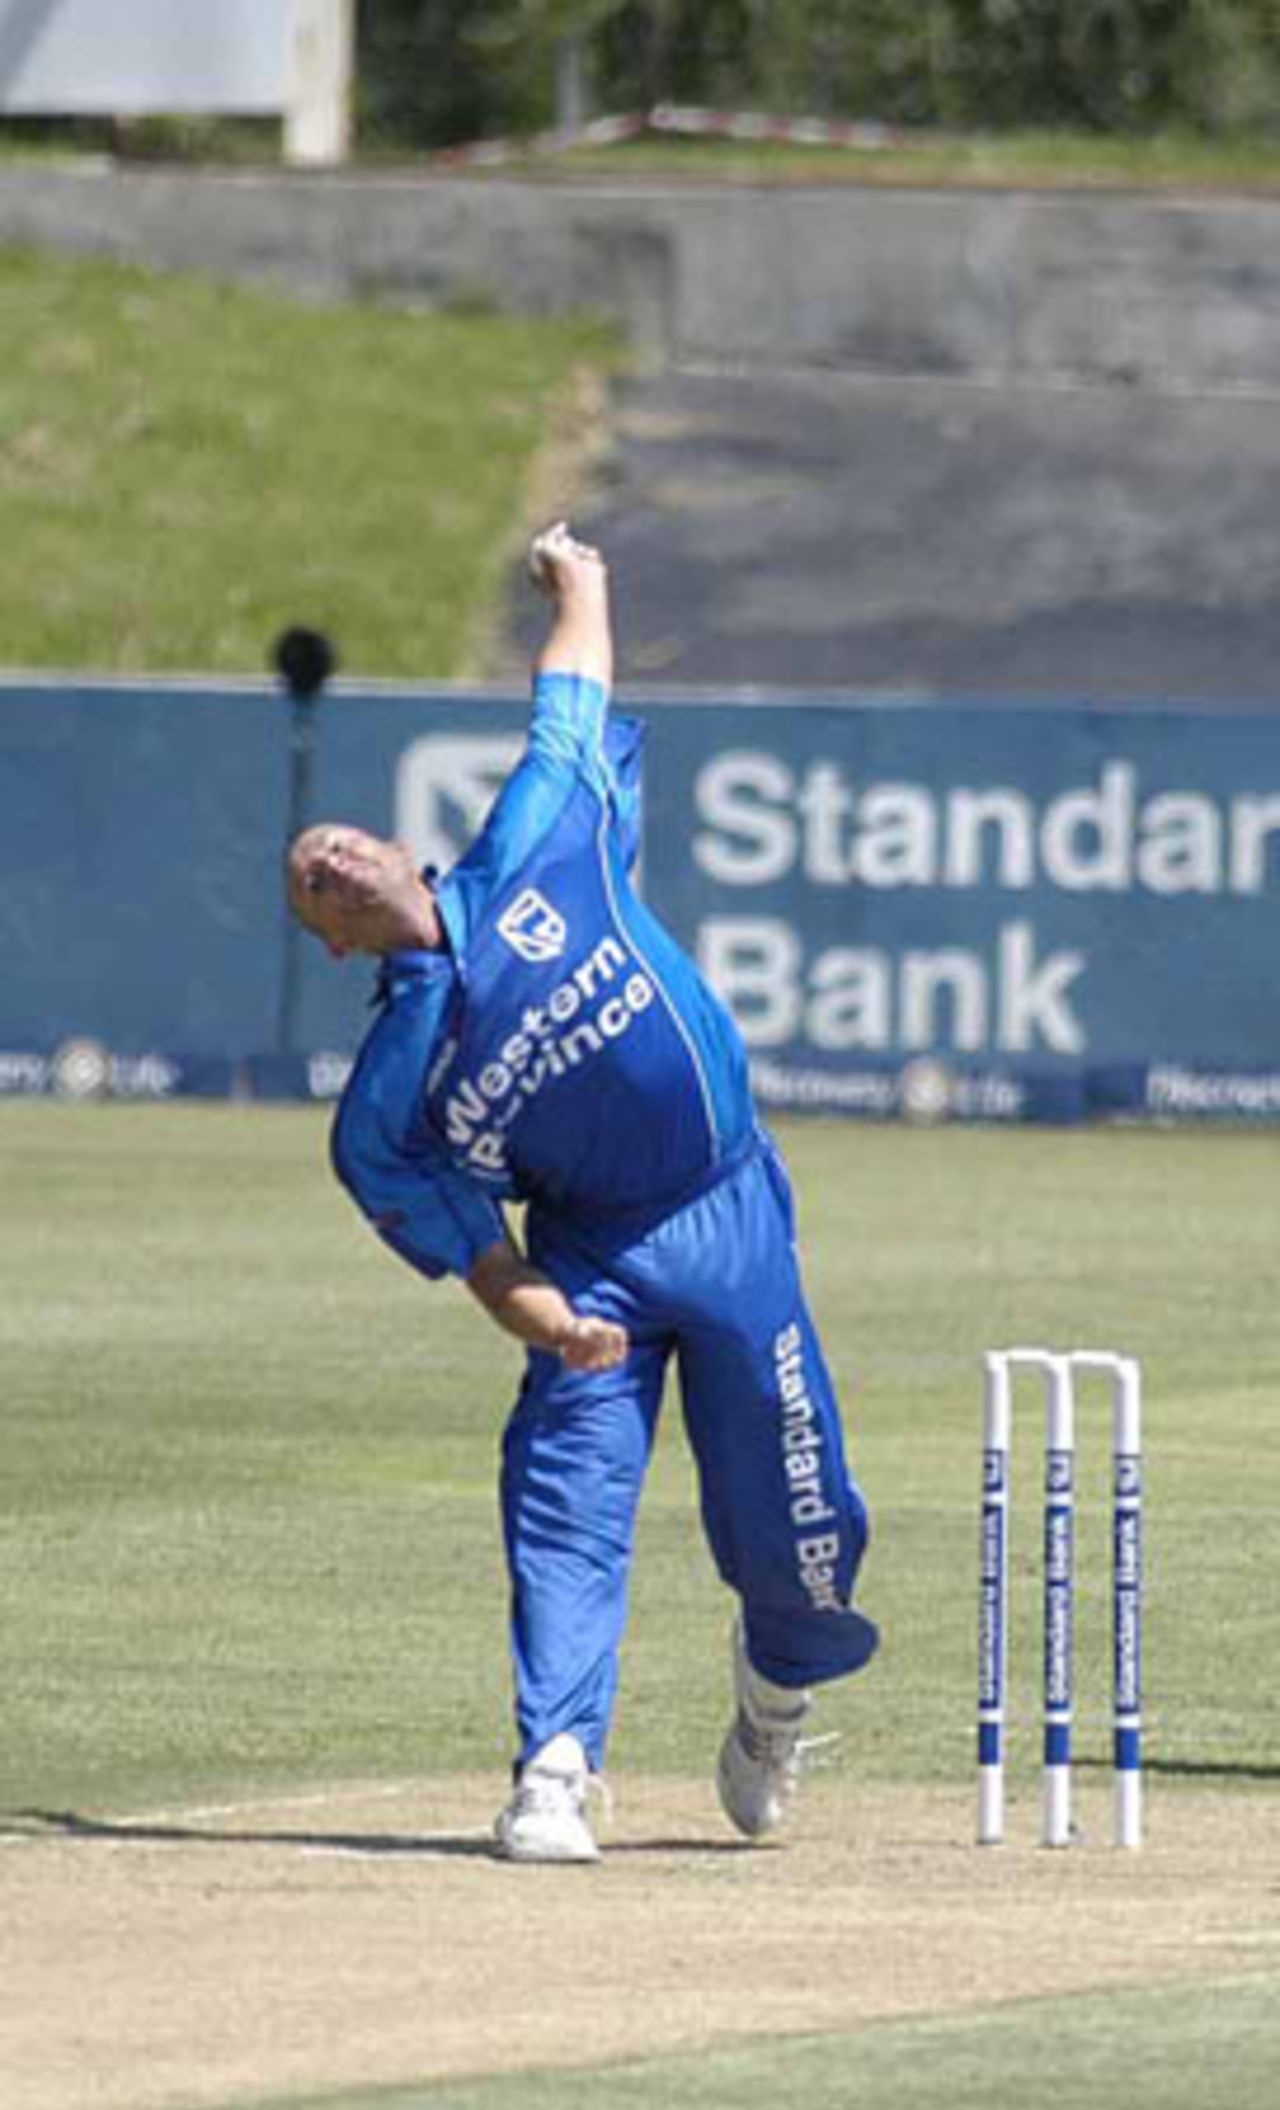 Charl Willoughby in full delivery stride against Boland